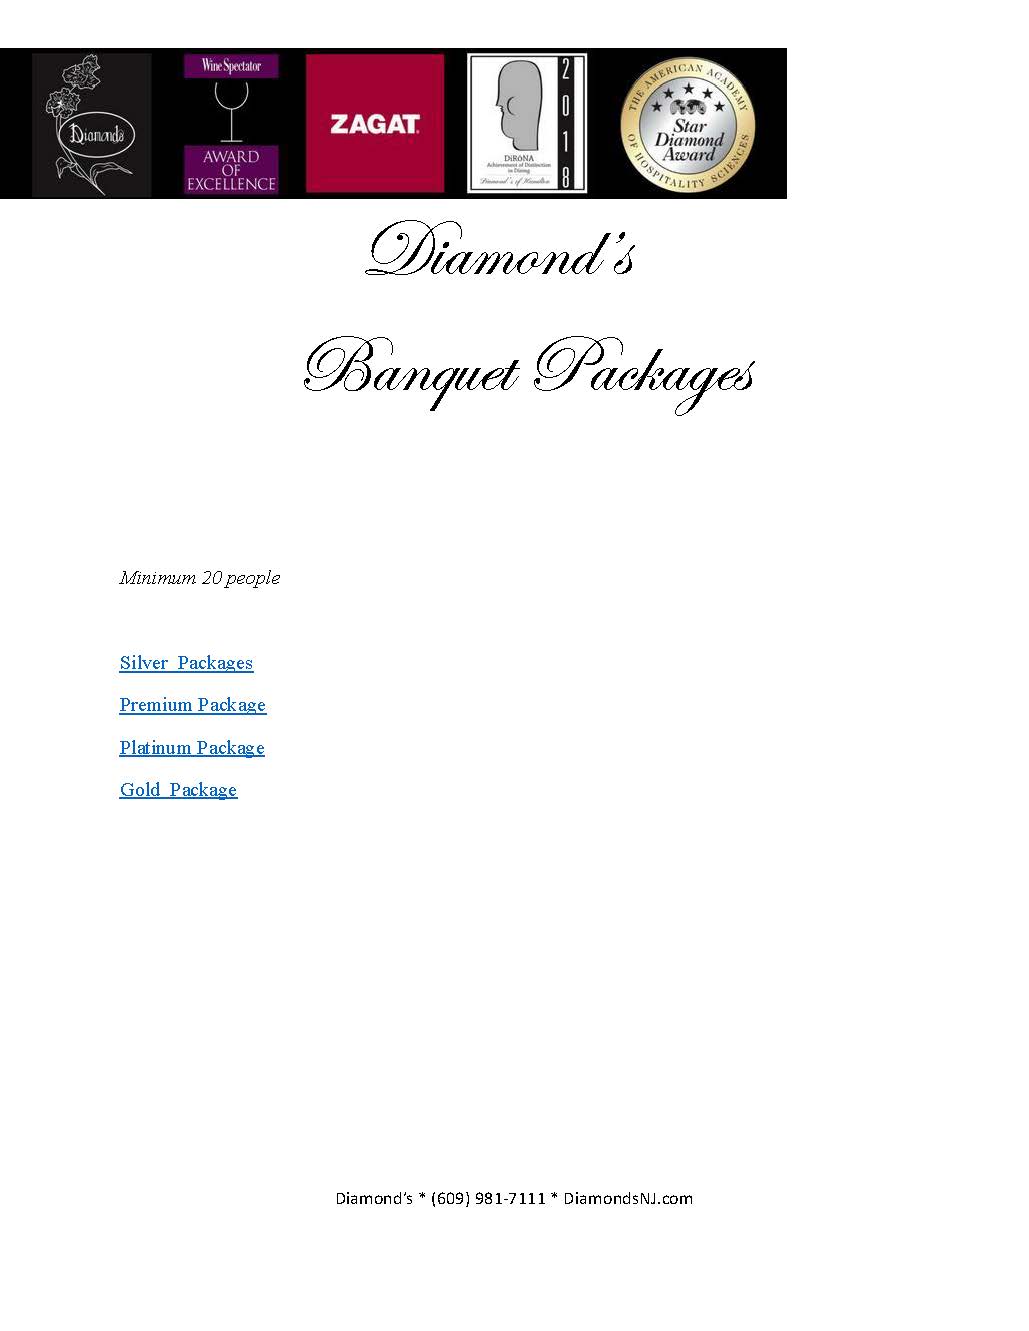 Promotional flyer for diamond's banquet packages featuring logos, minimum group requirement, and three package options: silver, premium, and gold, with contact details at the bottom.